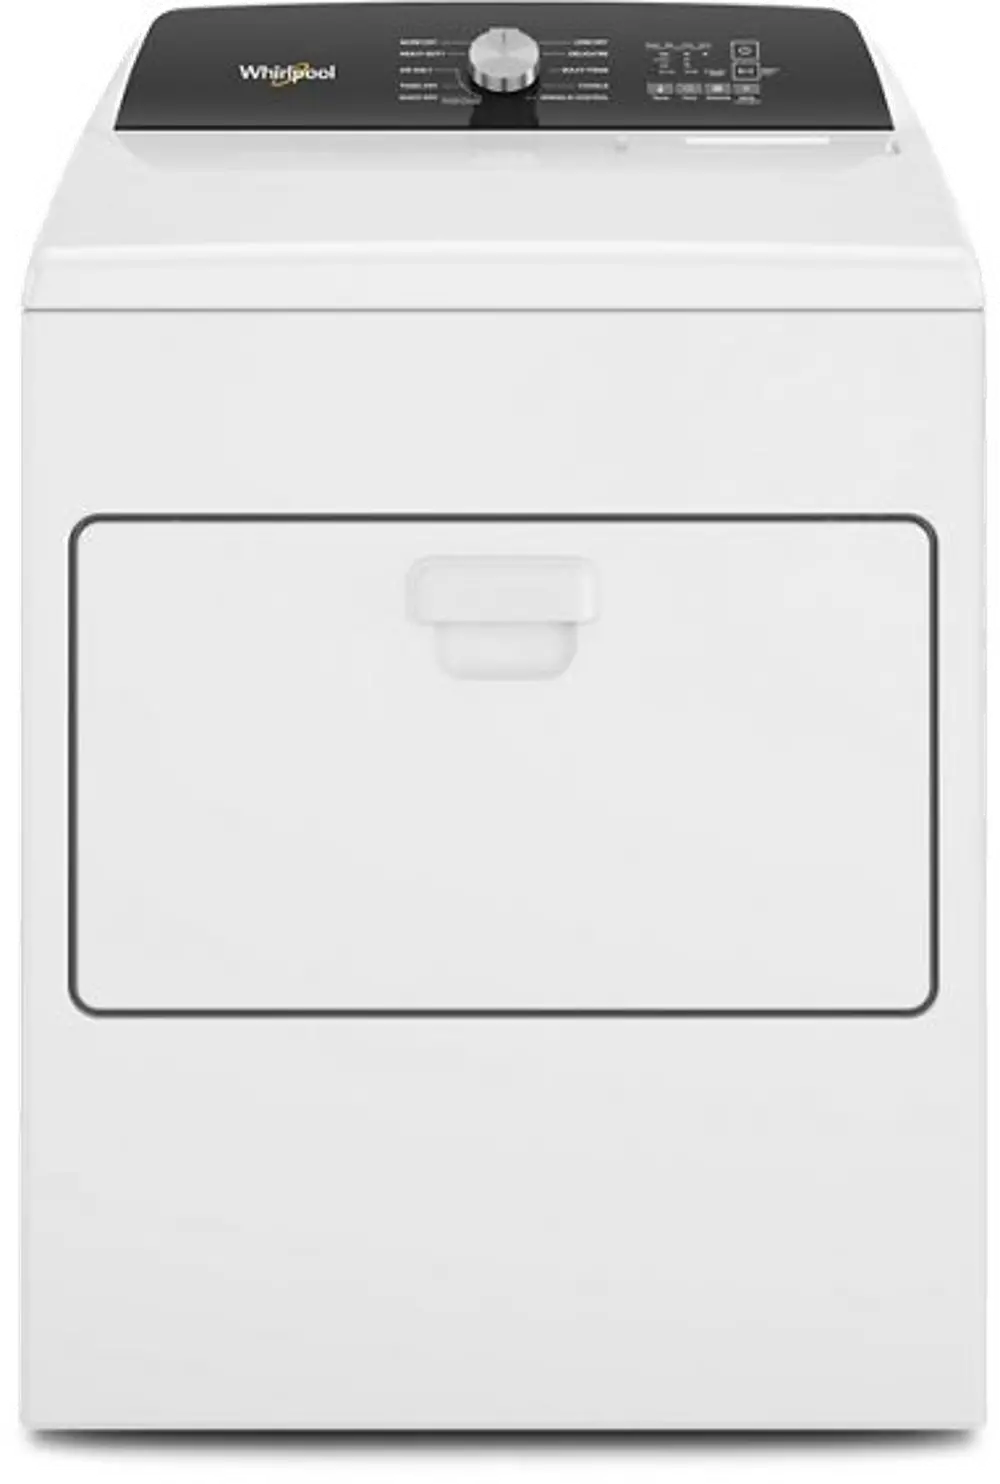 WED5010LW Whirlpool Electric Dryer W5010 - White 7.0 cu ft-1